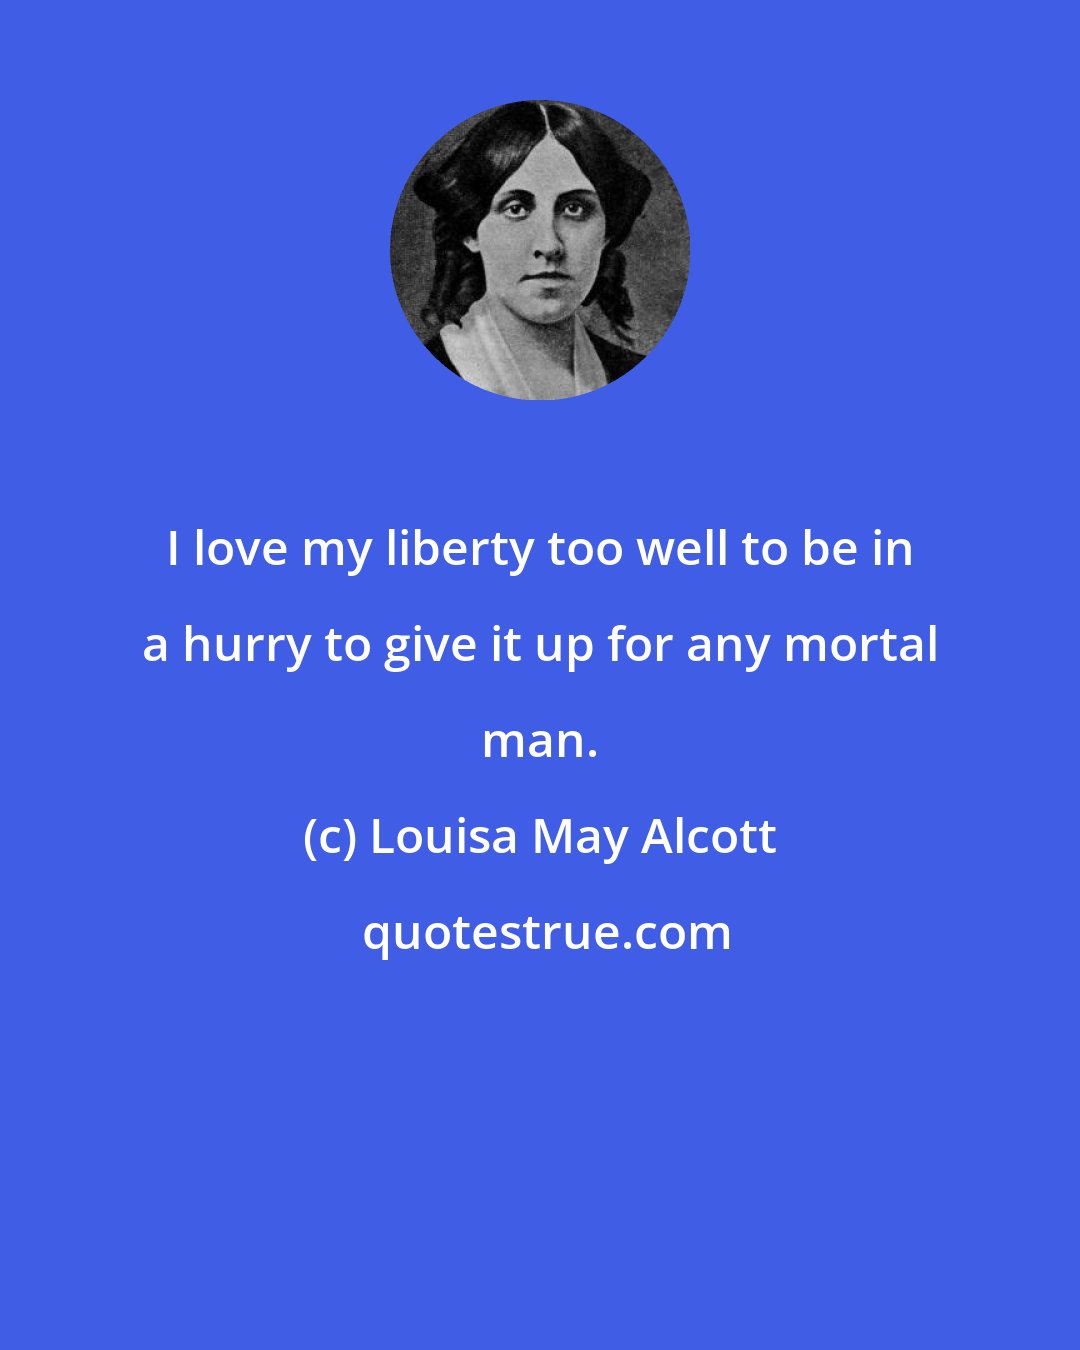 Louisa May Alcott: I love my liberty too well to be in a hurry to give it up for any mortal man.